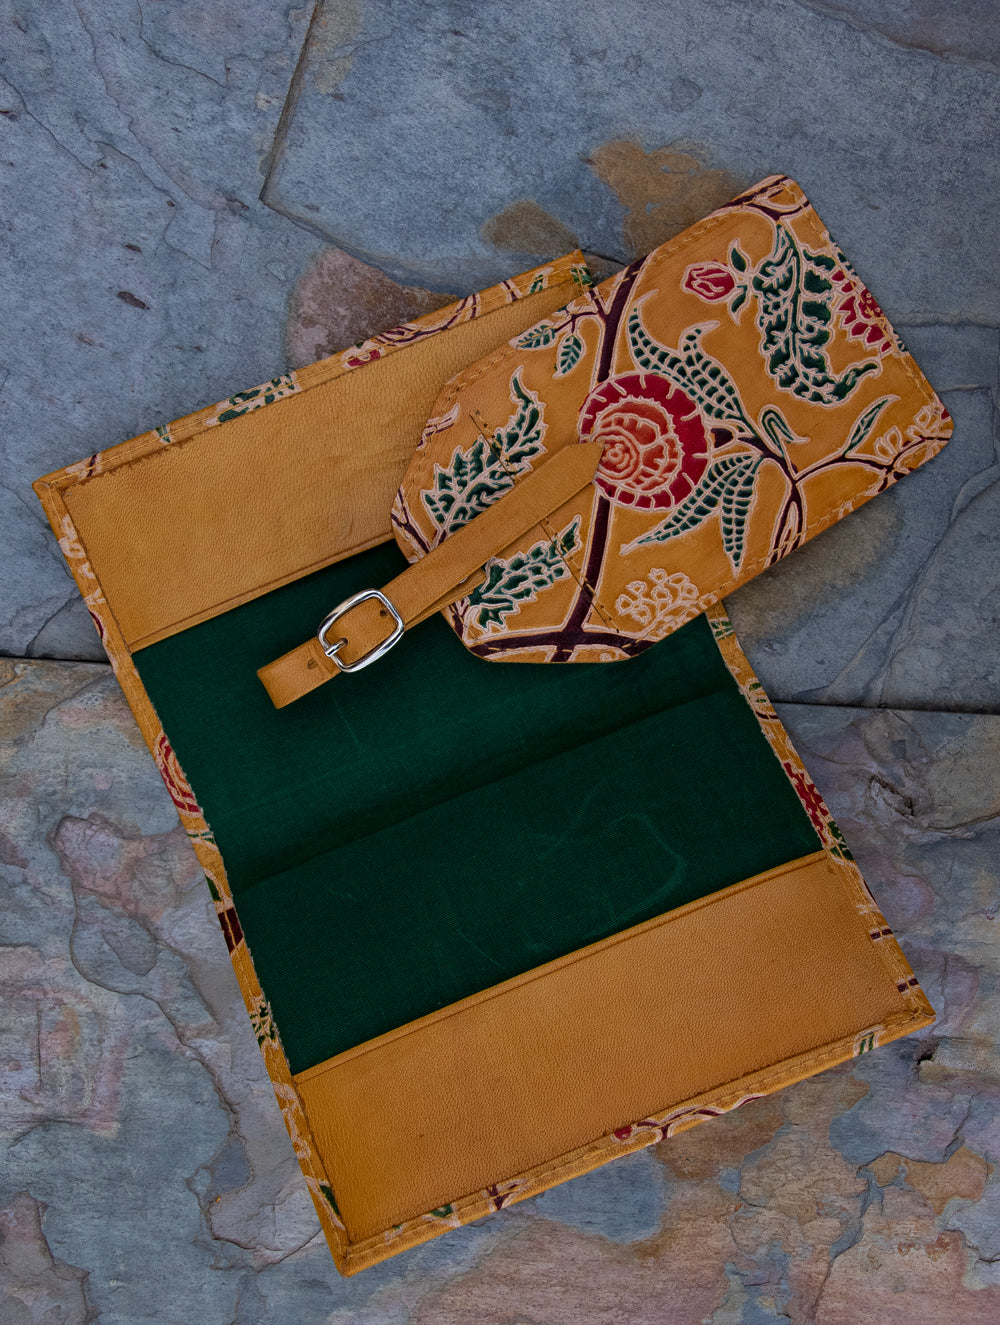 Load image into Gallery viewer, Embossed Leather Travel set - Passport cover &amp; Luggage tag - The India Craft House 